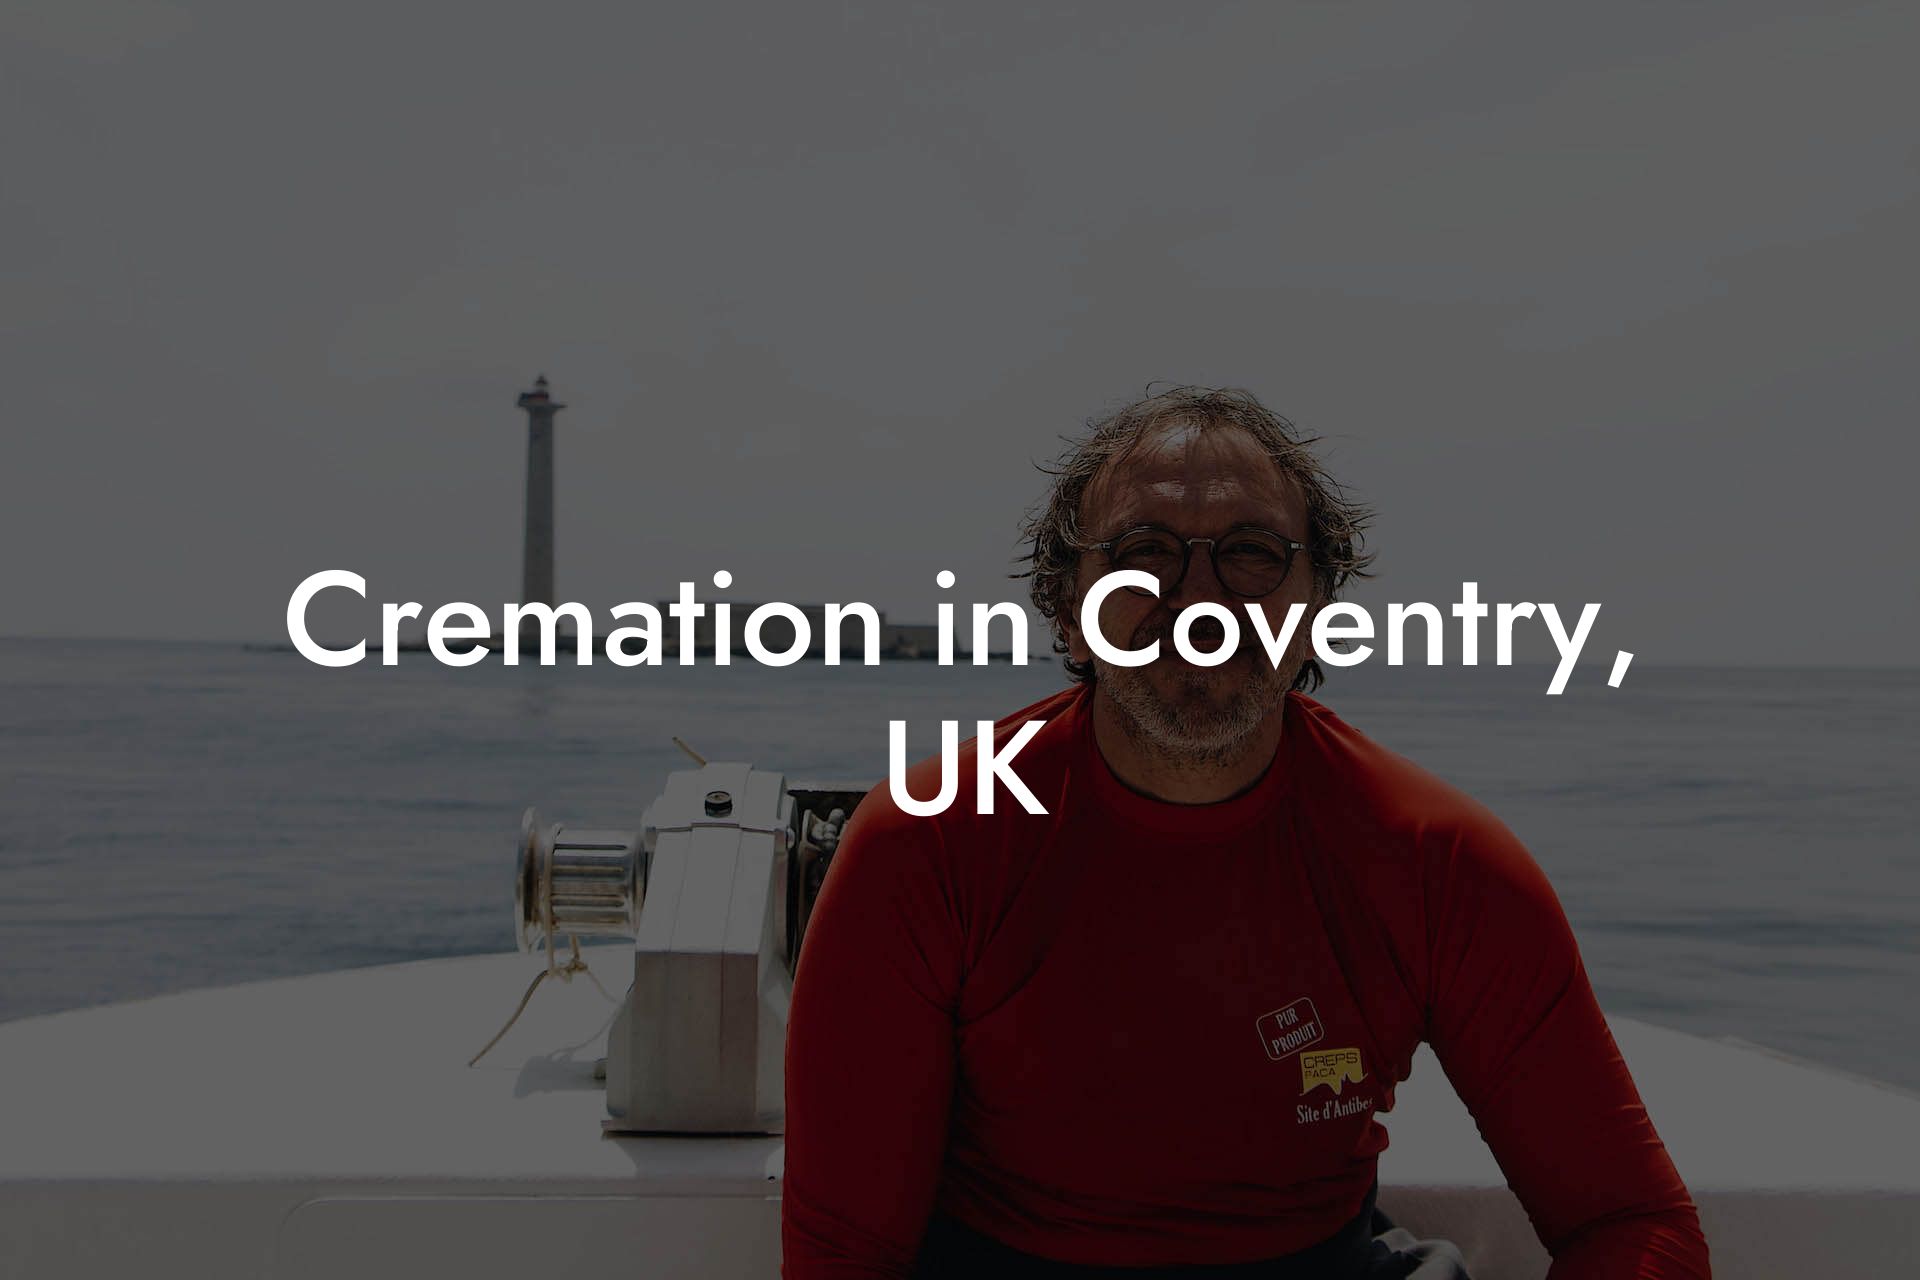 Cremation in Coventry, UK